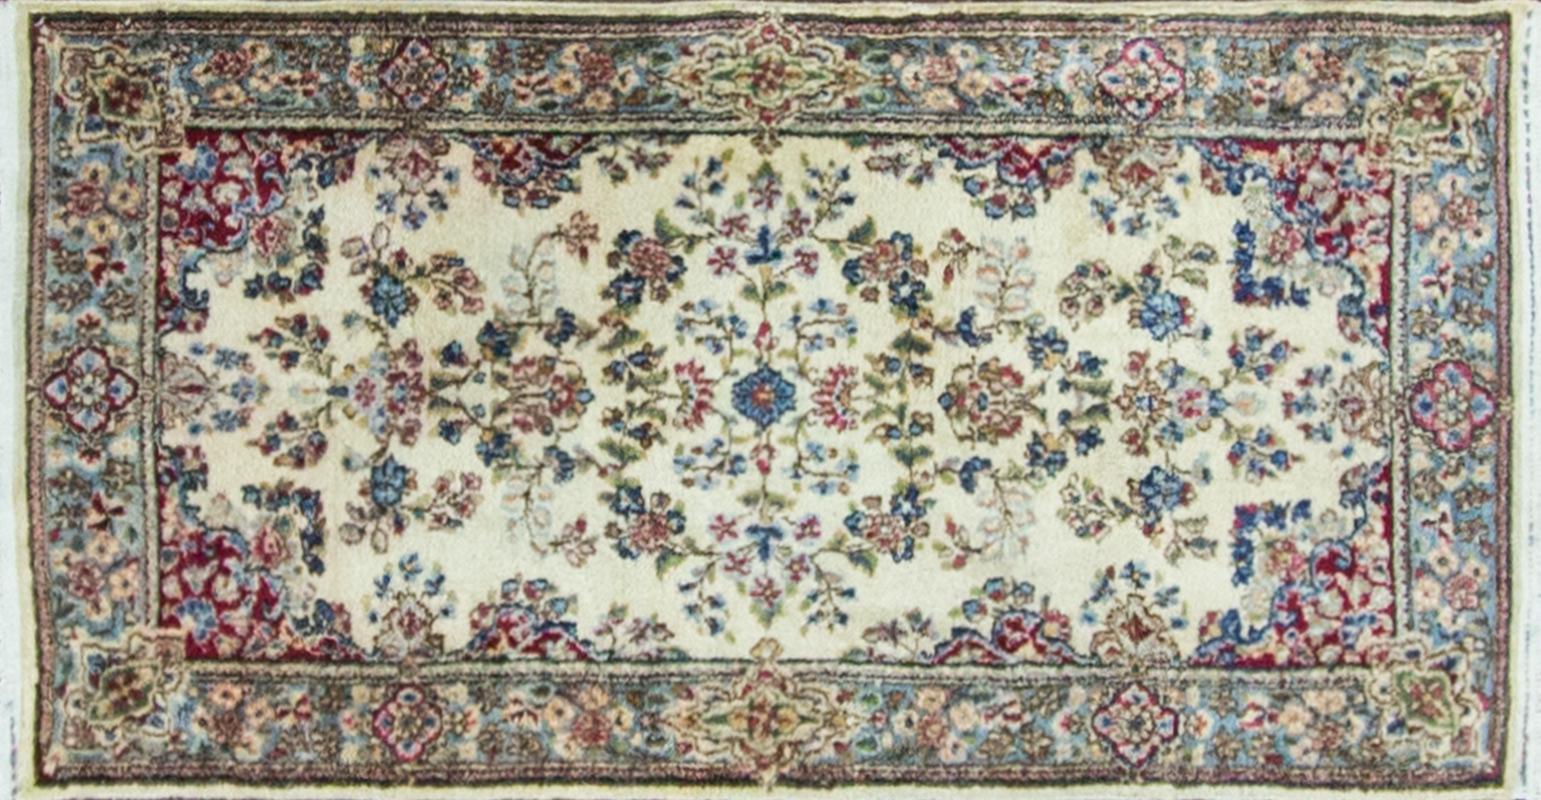 Handmade Persian Kerman rug with a colorful floral motif on an ivory field, circa 1940. Measures: 2'6